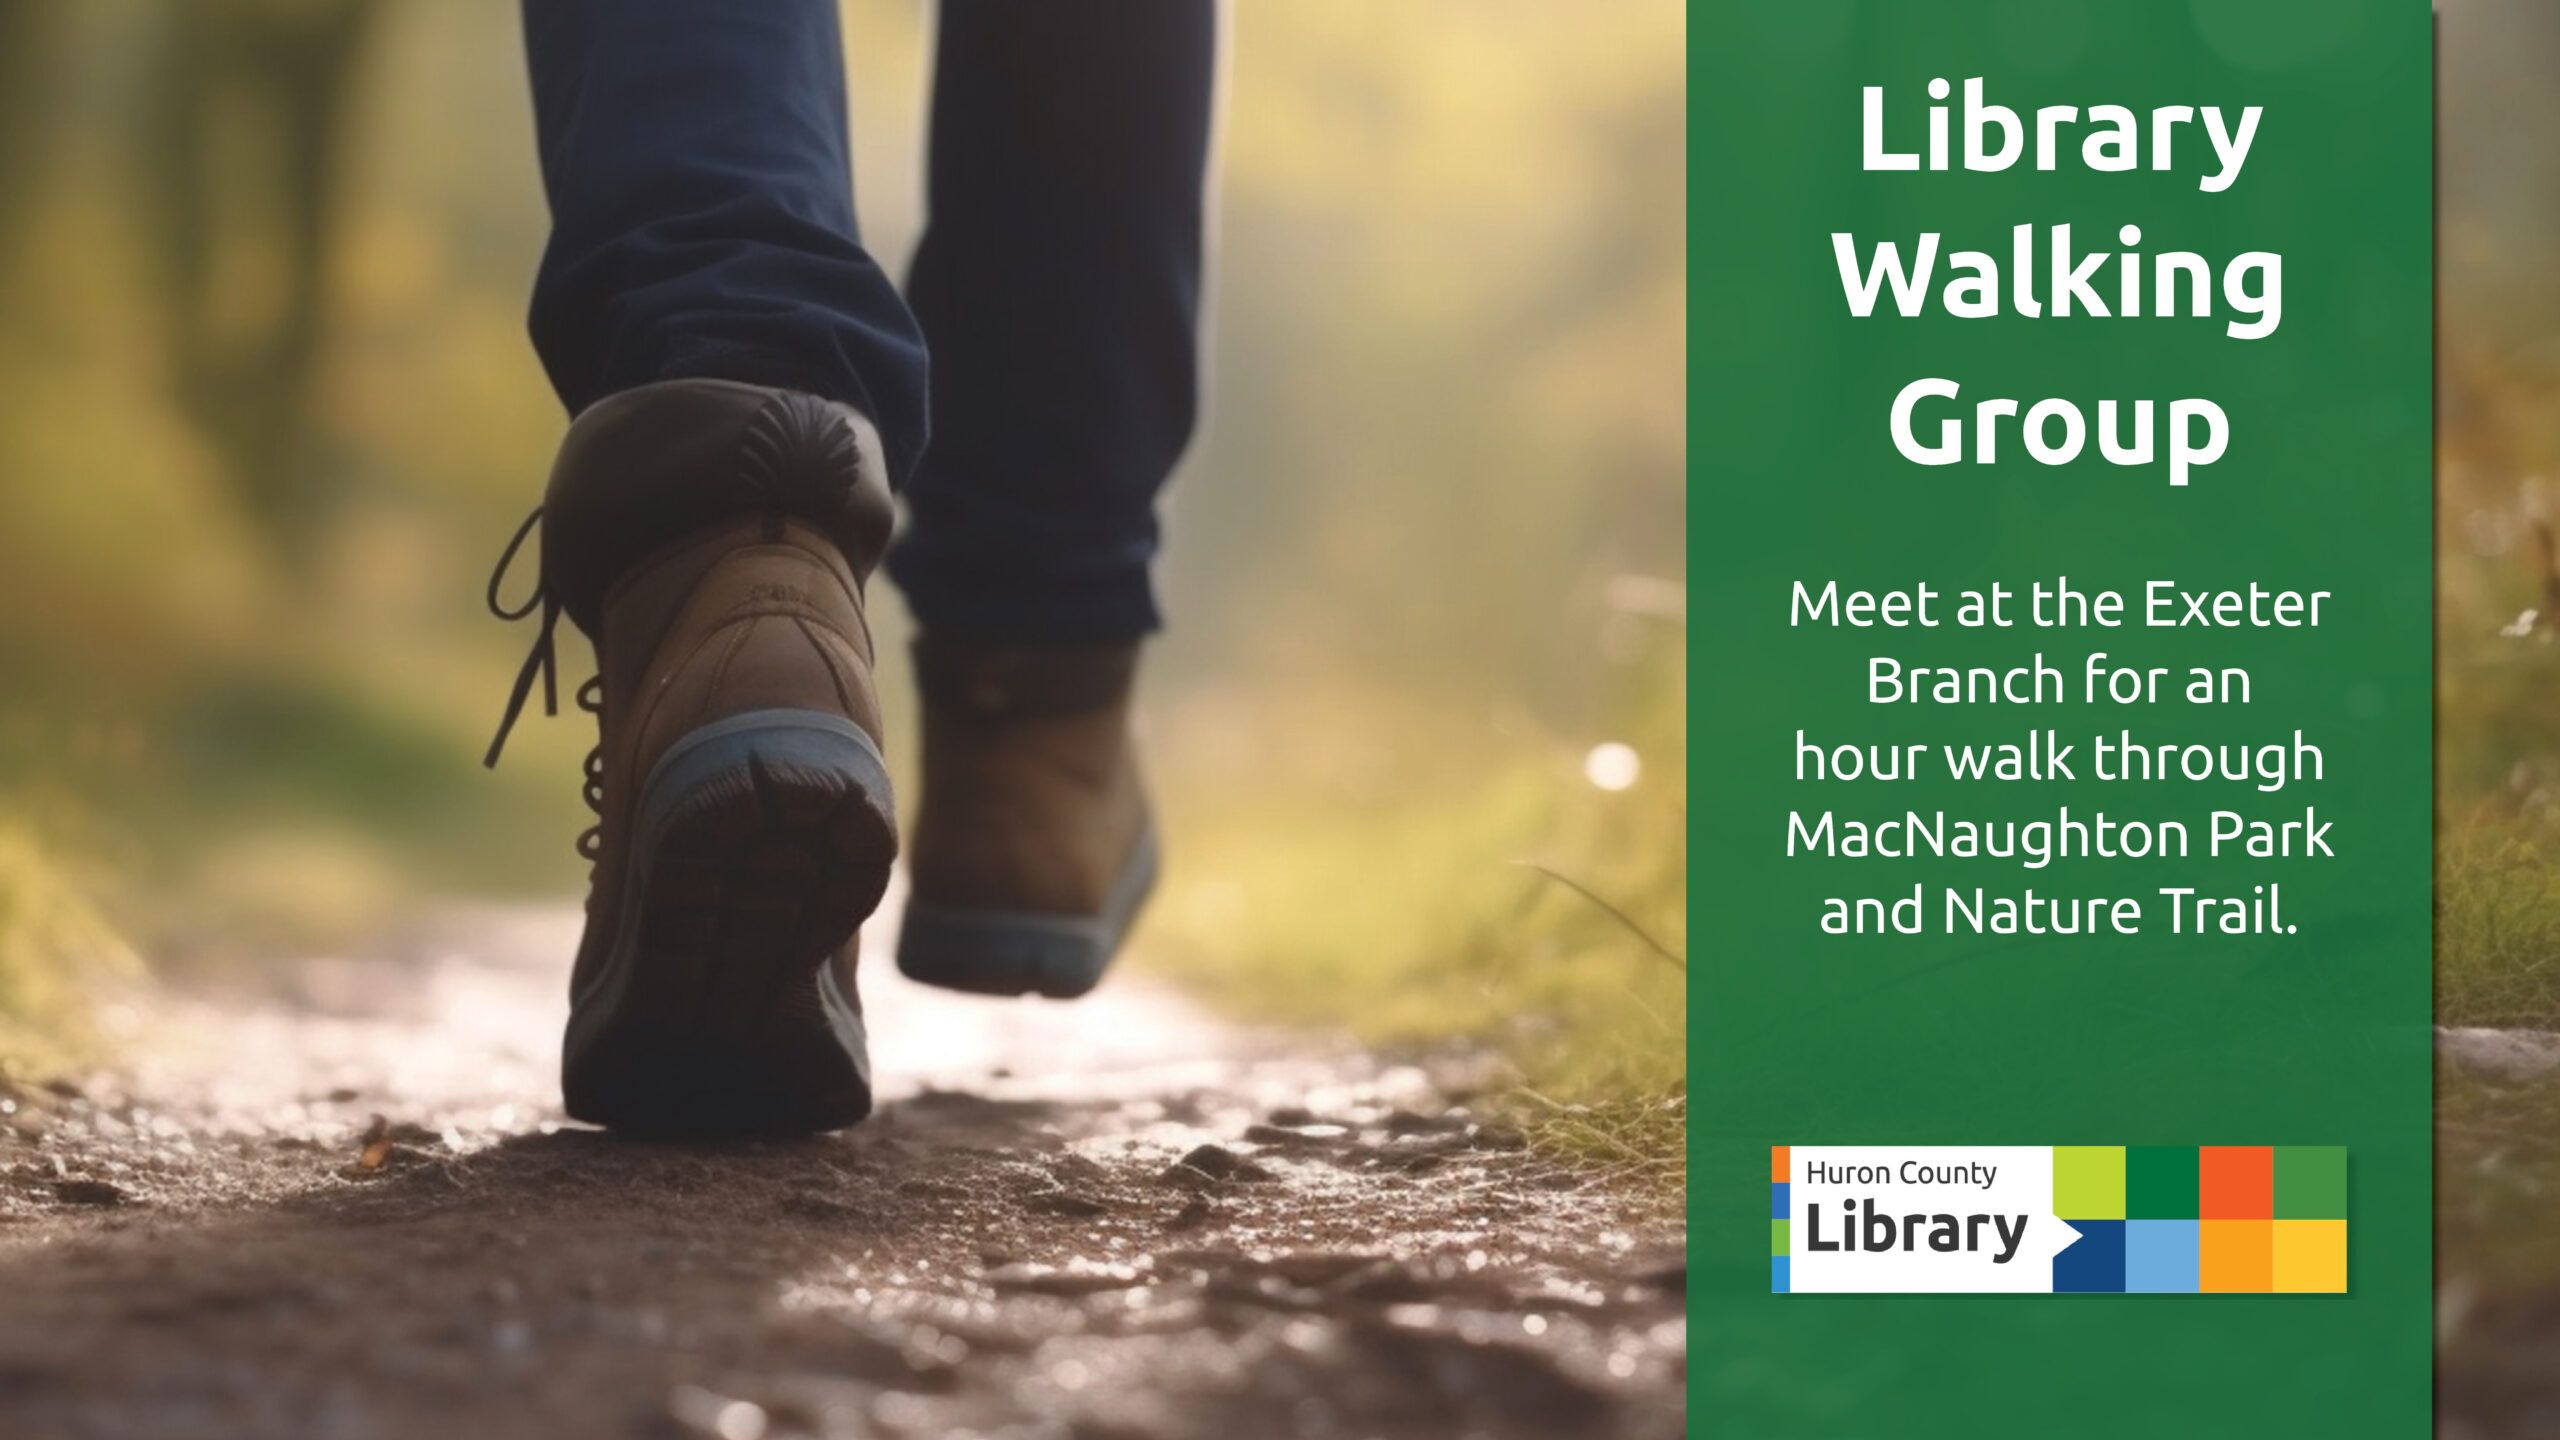 Photo of feet walking on a trail with text promoting Library Walking Group at Exeter